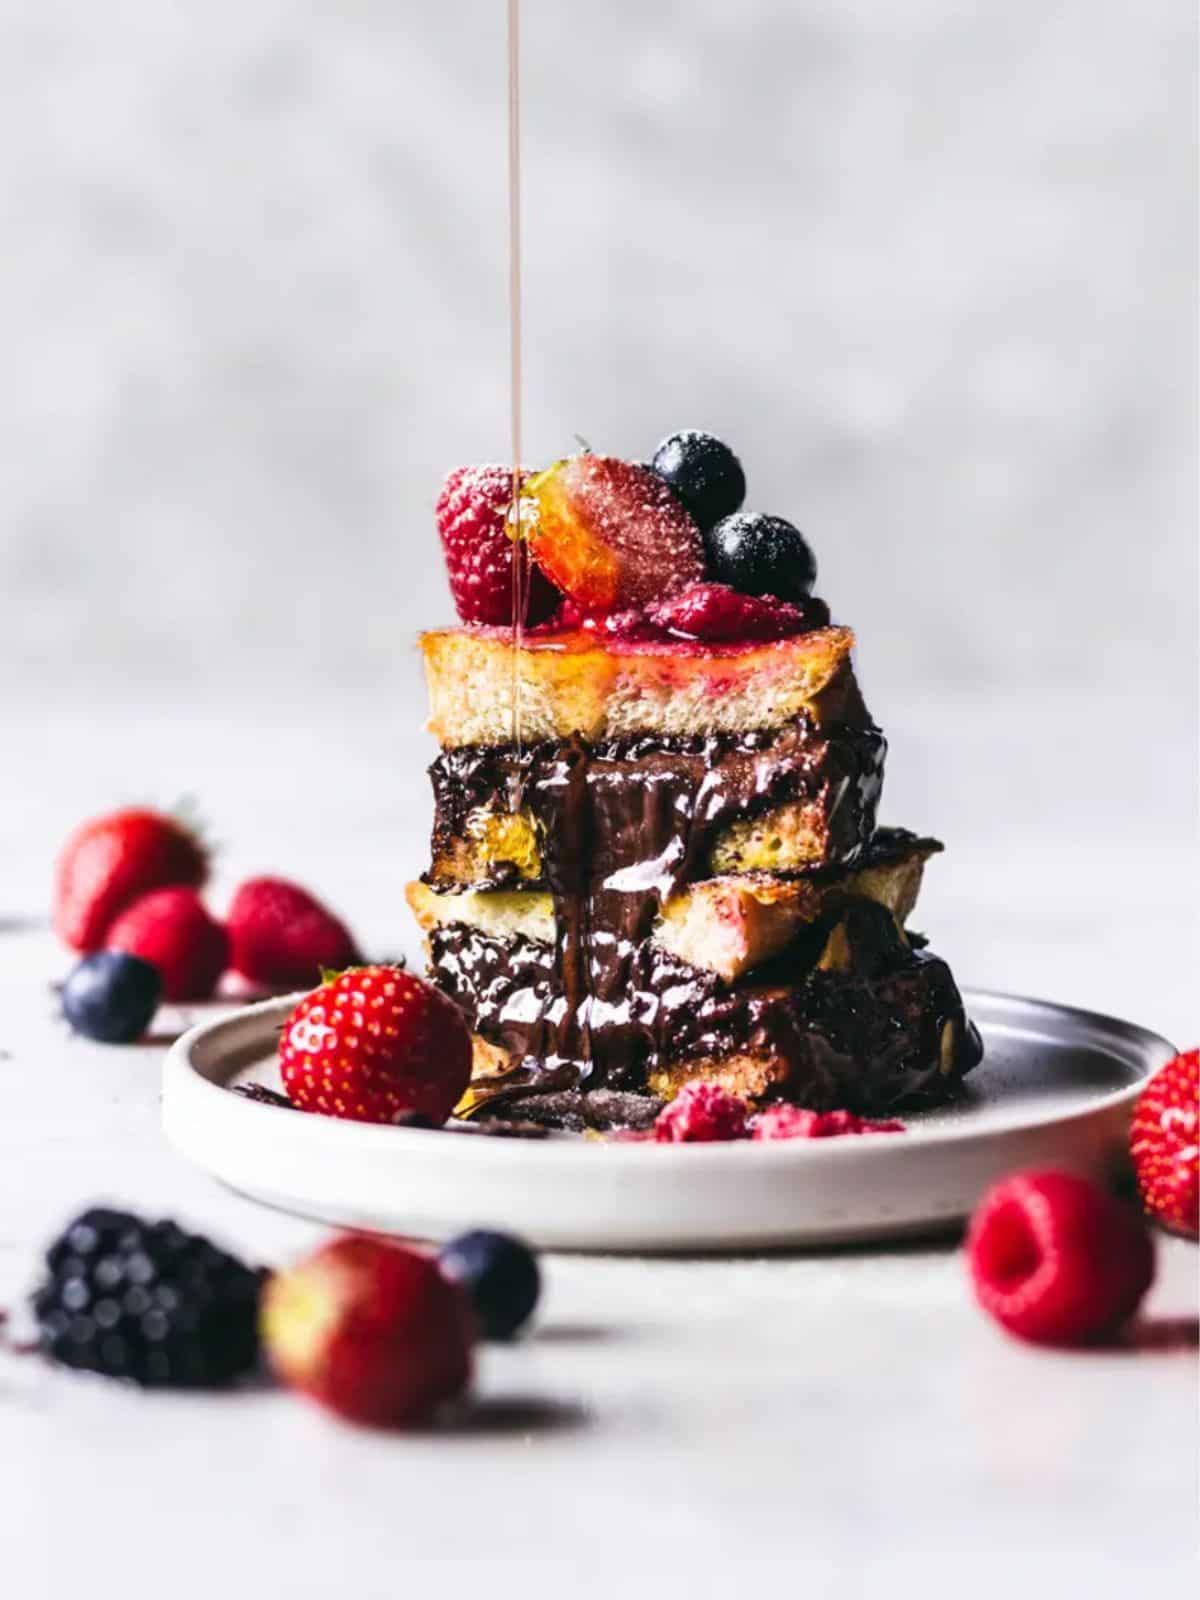 slices of French toast stuffed with Nutella and dark chocolate, topped with fresh berries.